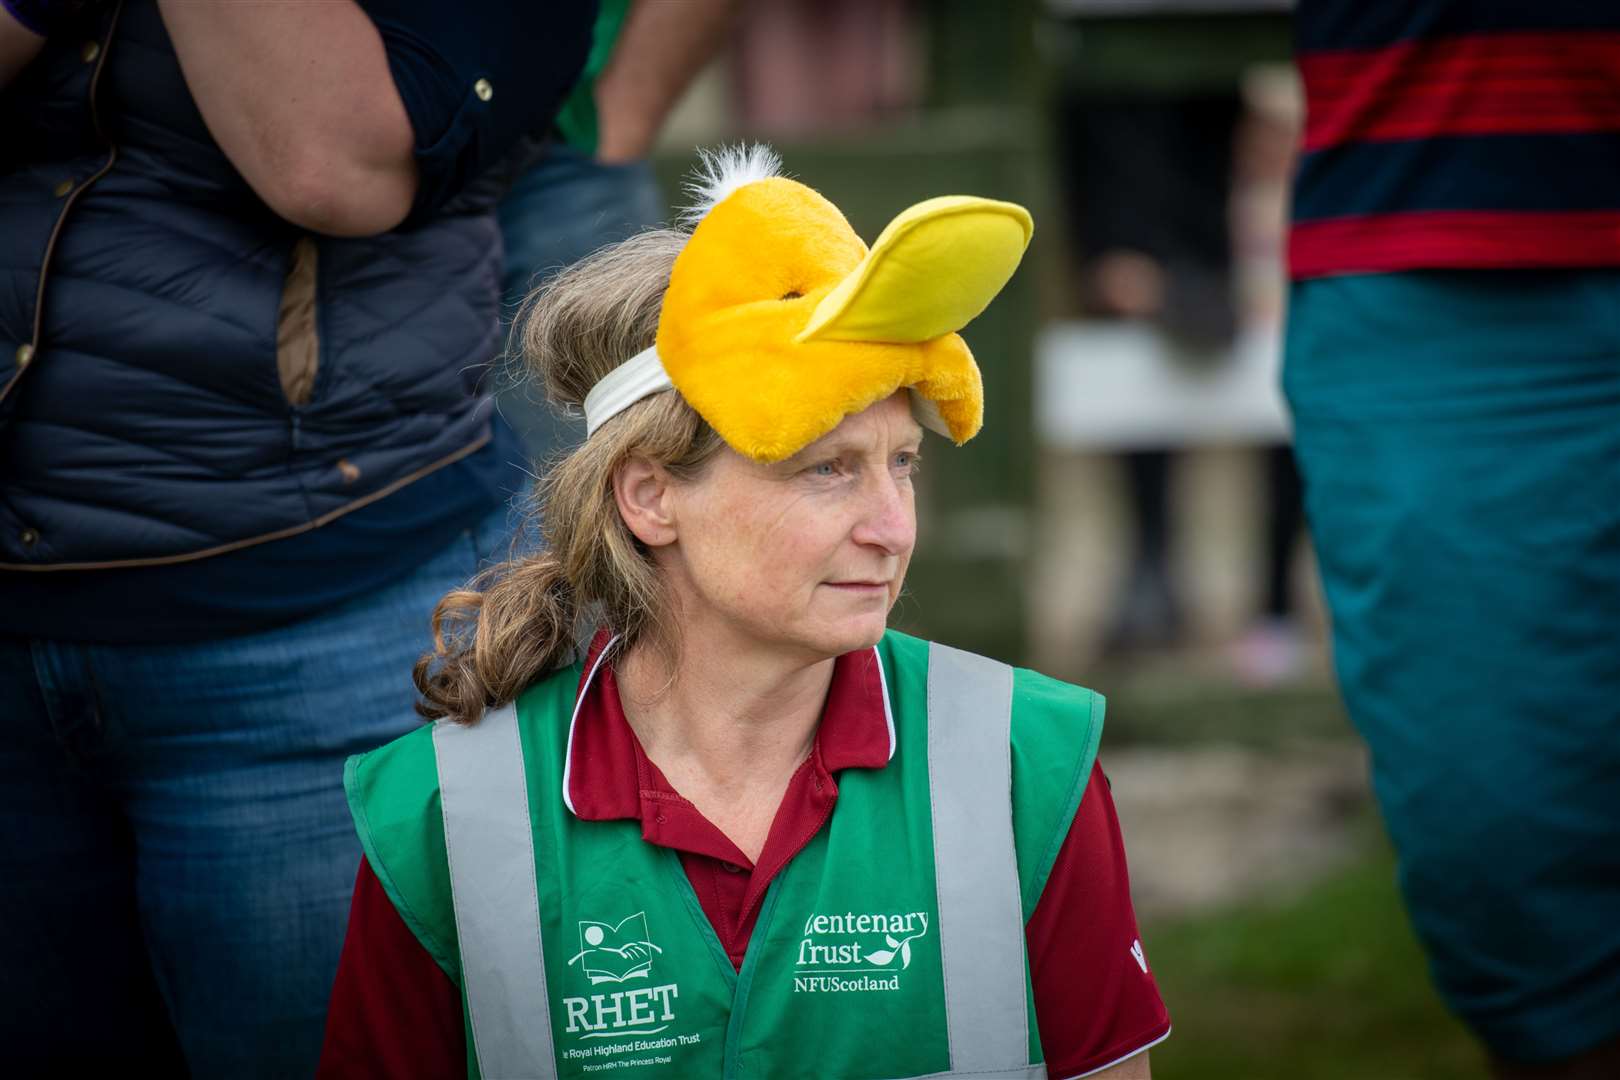 A moment for reflection at the event which also provided an opportunity to show the general public a bit more about what's involved with farming and production of the goods many take for granted. Picture: Callum Mackay